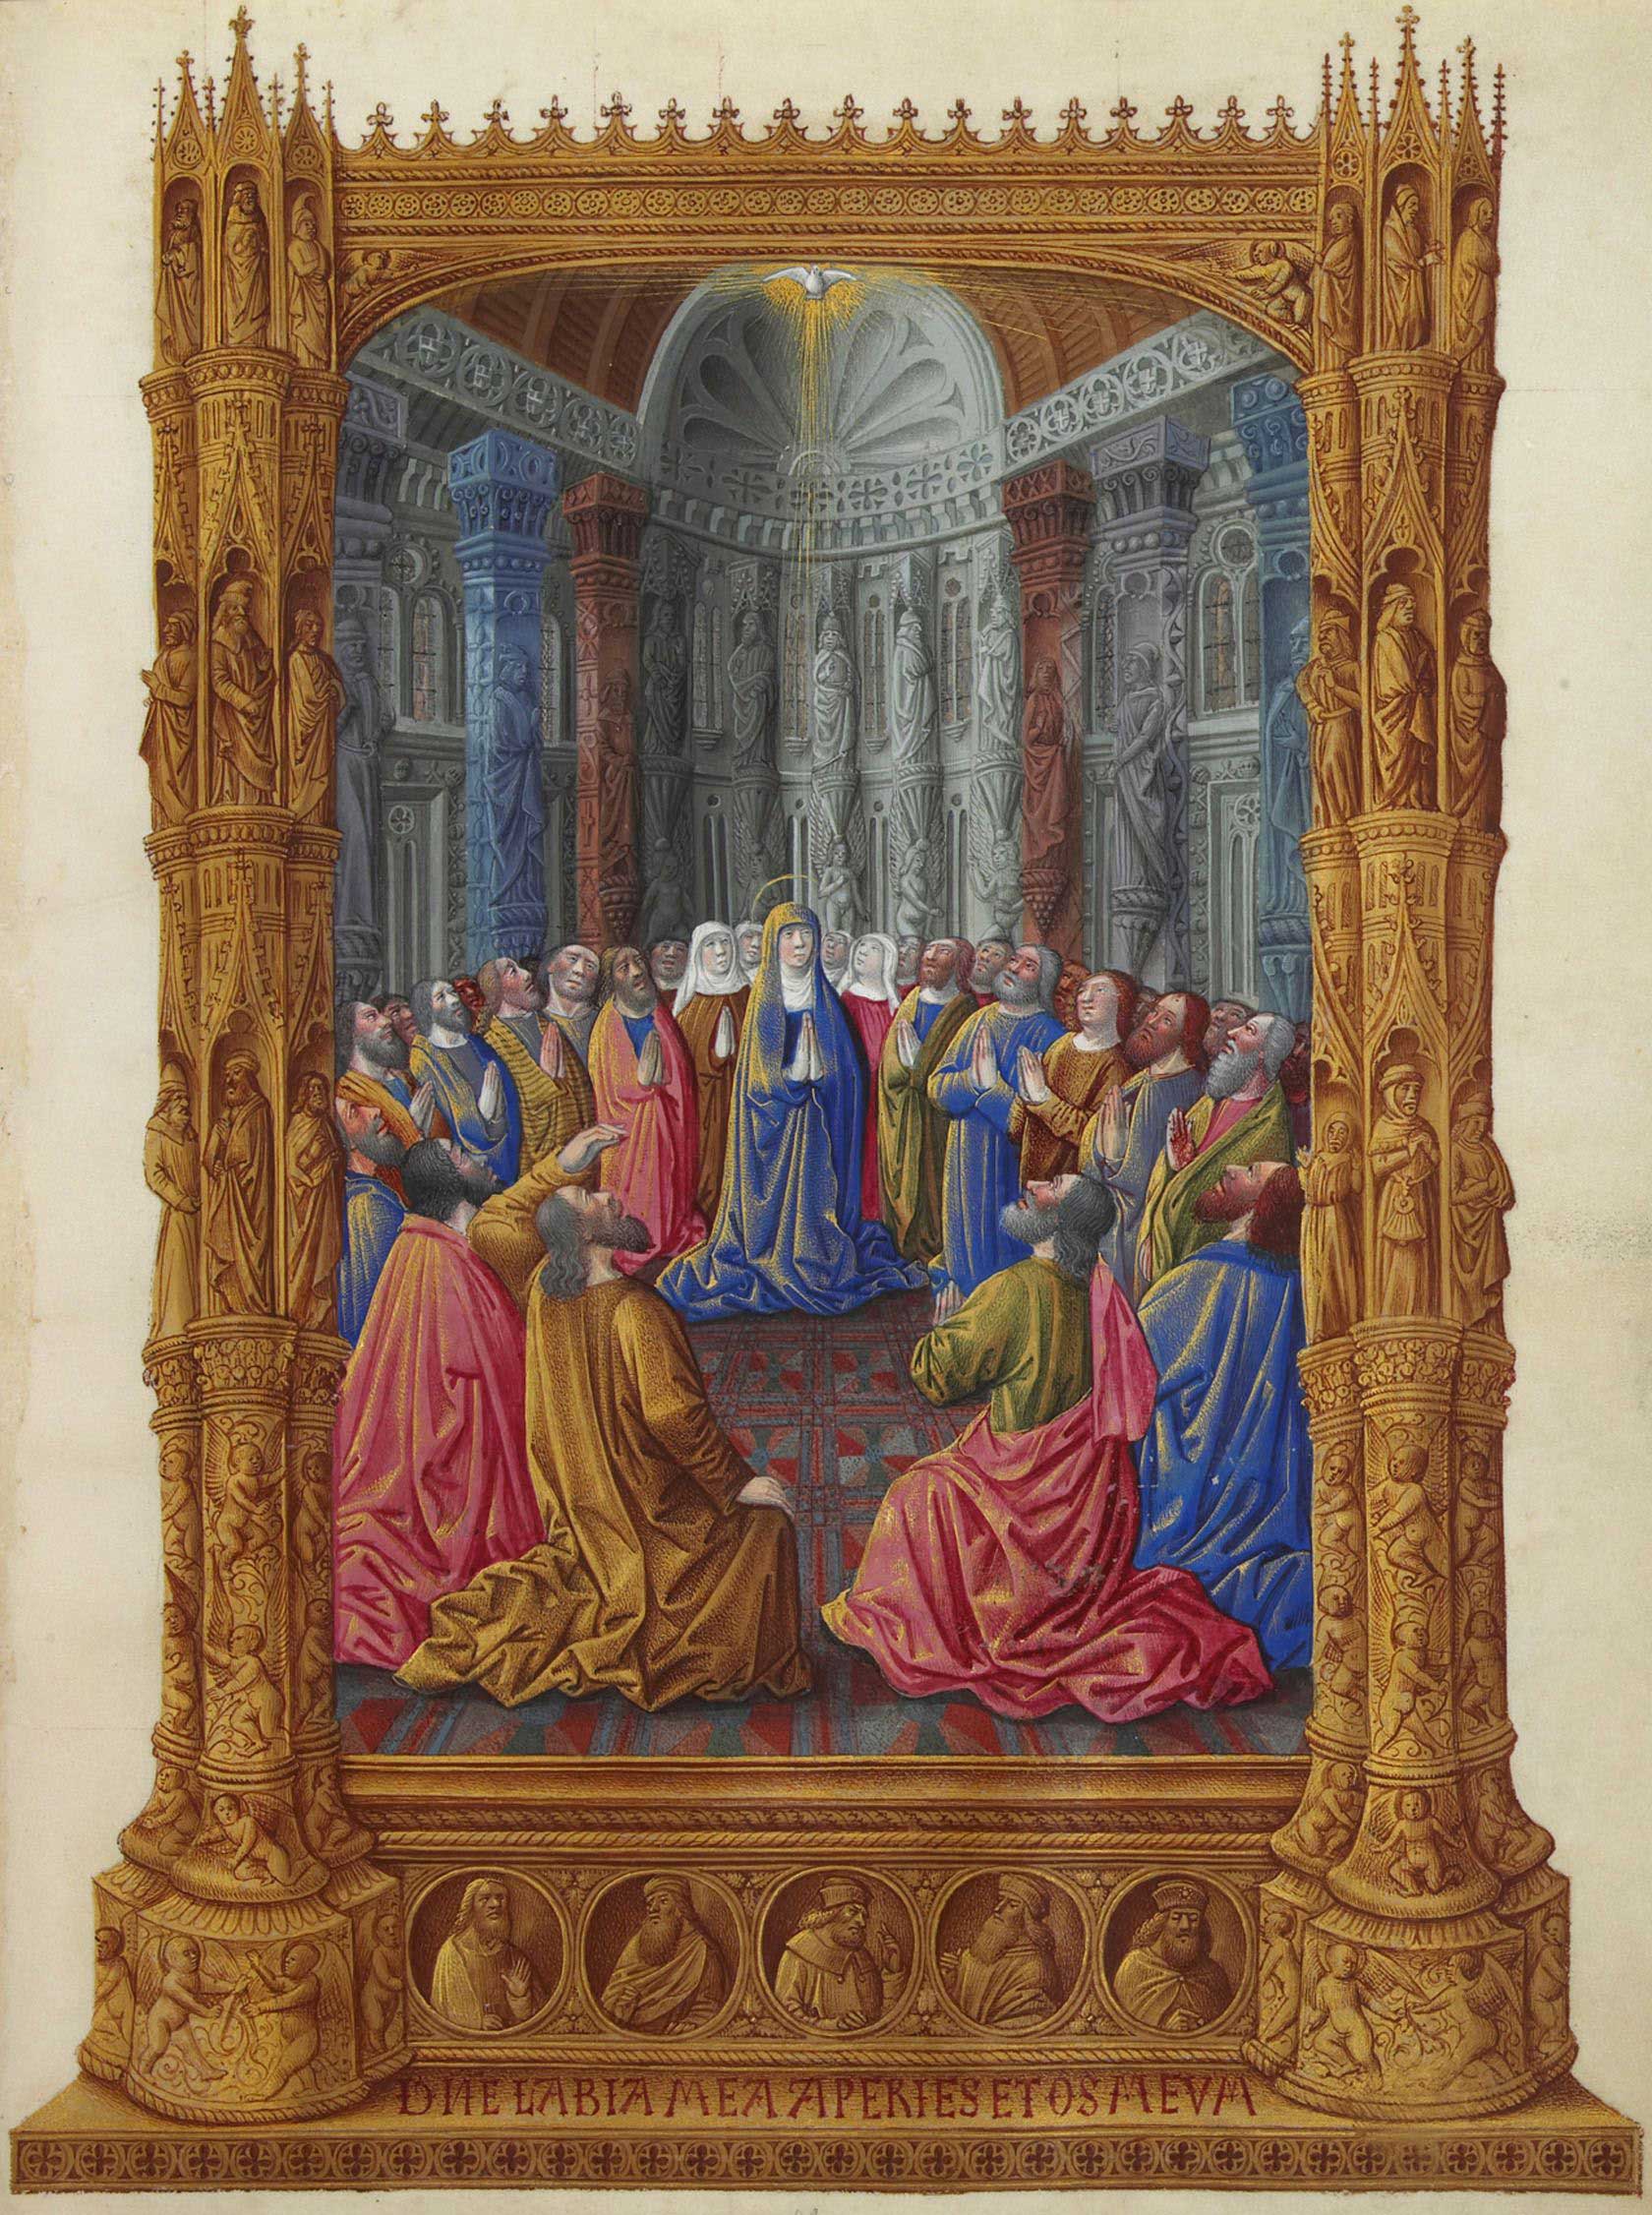 Pentecost, from the Très Riches Heures du Duc de Berry, a book of hours by the Dutch painters the Limbourg brothers, left unfinished in 1416 when all three brothers and their patron, Jean, Duc de Berry, died, possibly from the plague. Musée Condé, Chantilly, France.